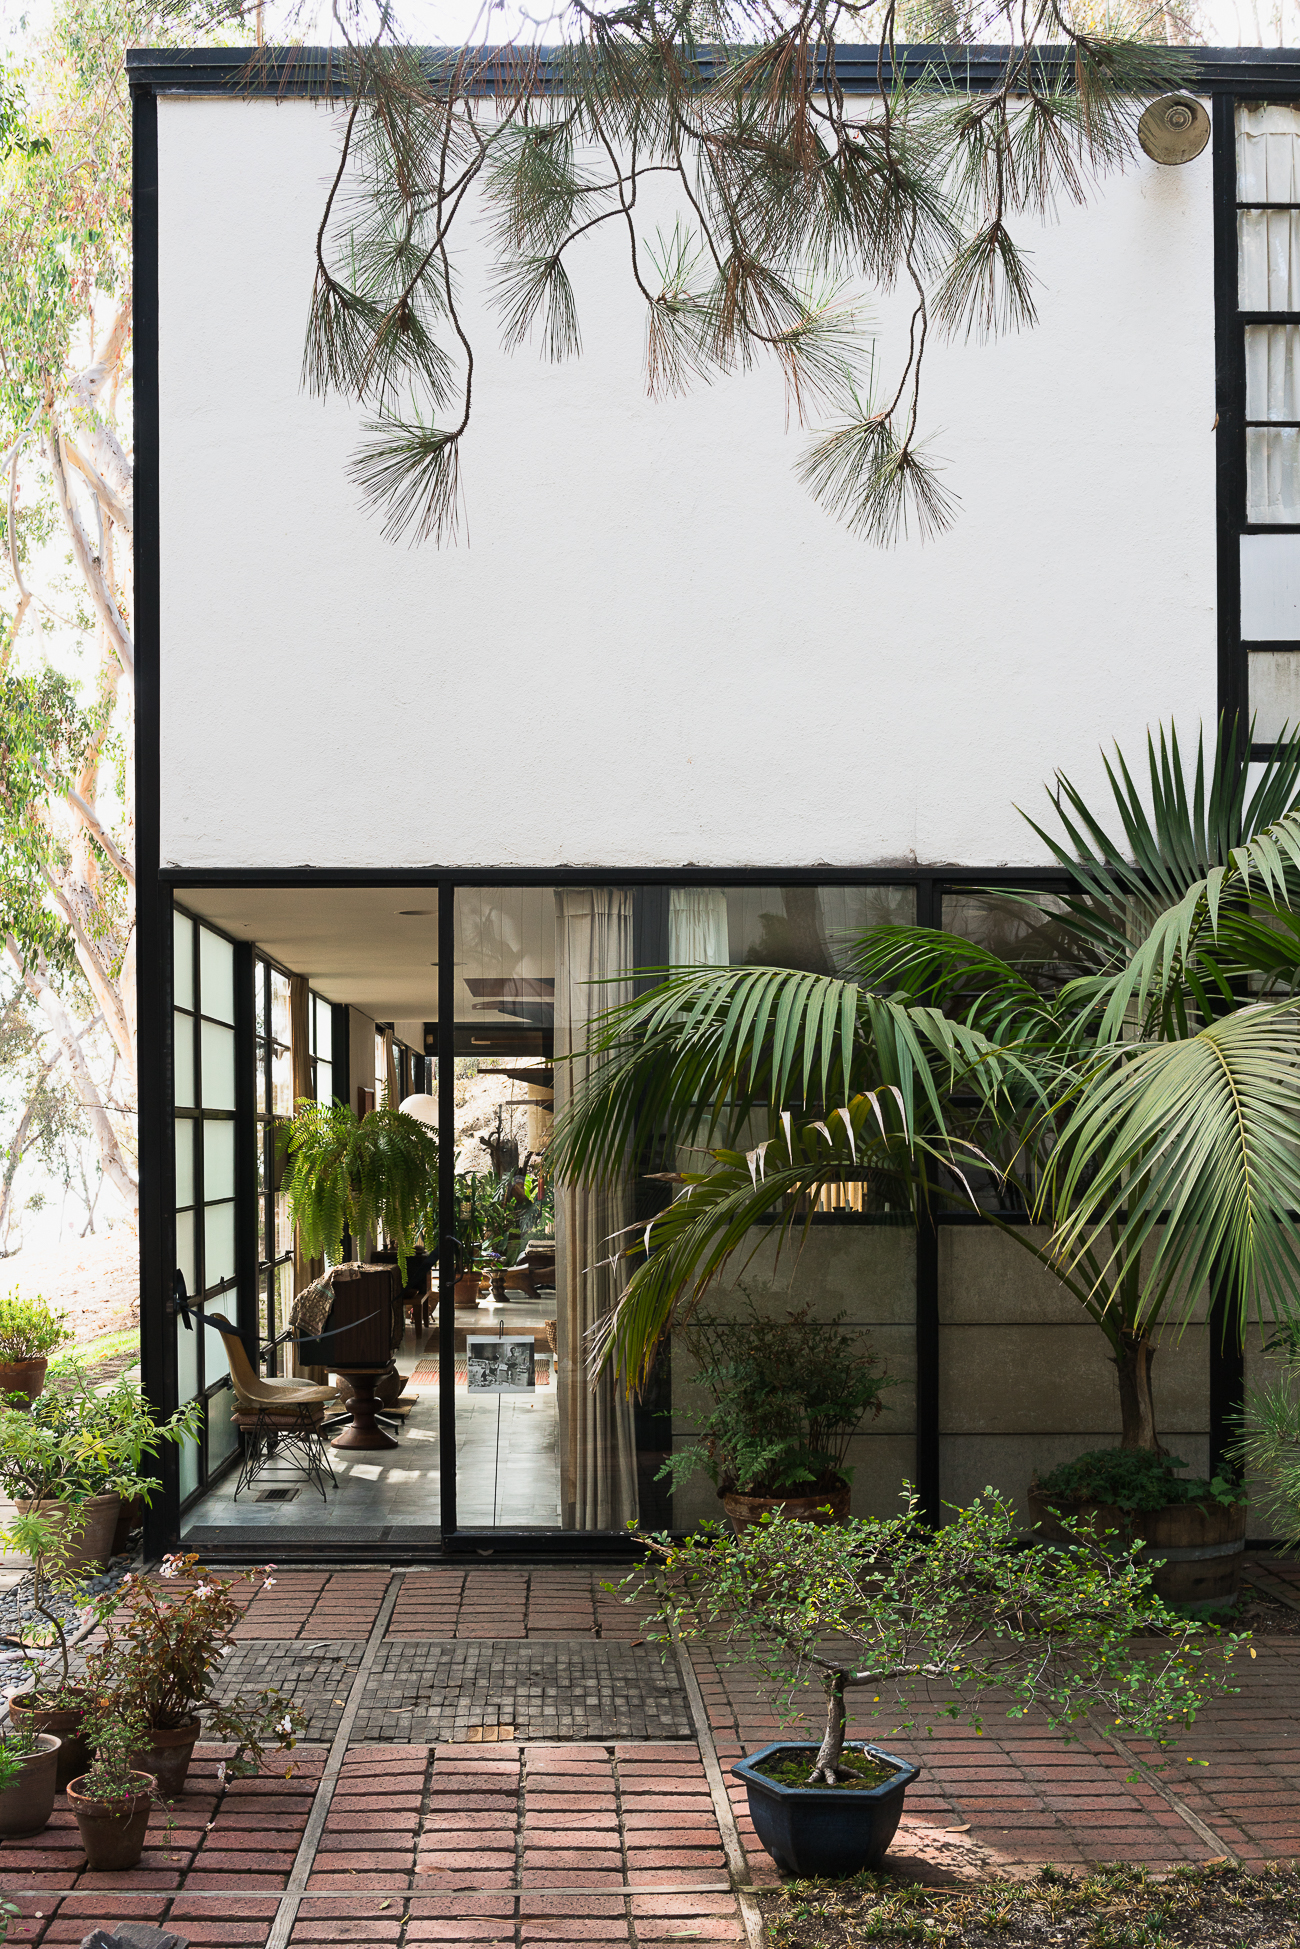 Visiting the Eames House Case Study #8 / See and Savour